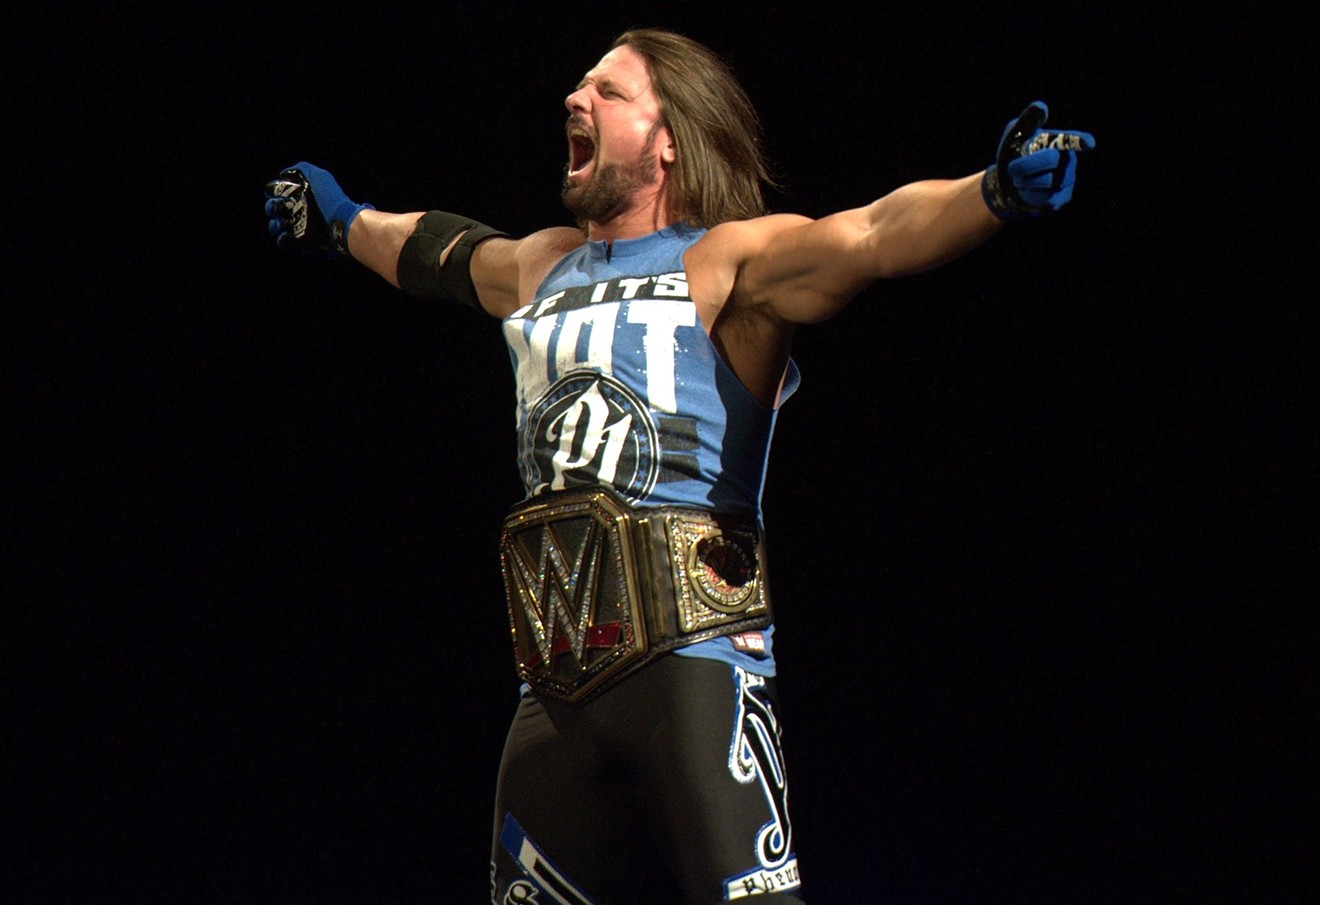 Current WWE champion and SmackDown superstar AJ Styles.